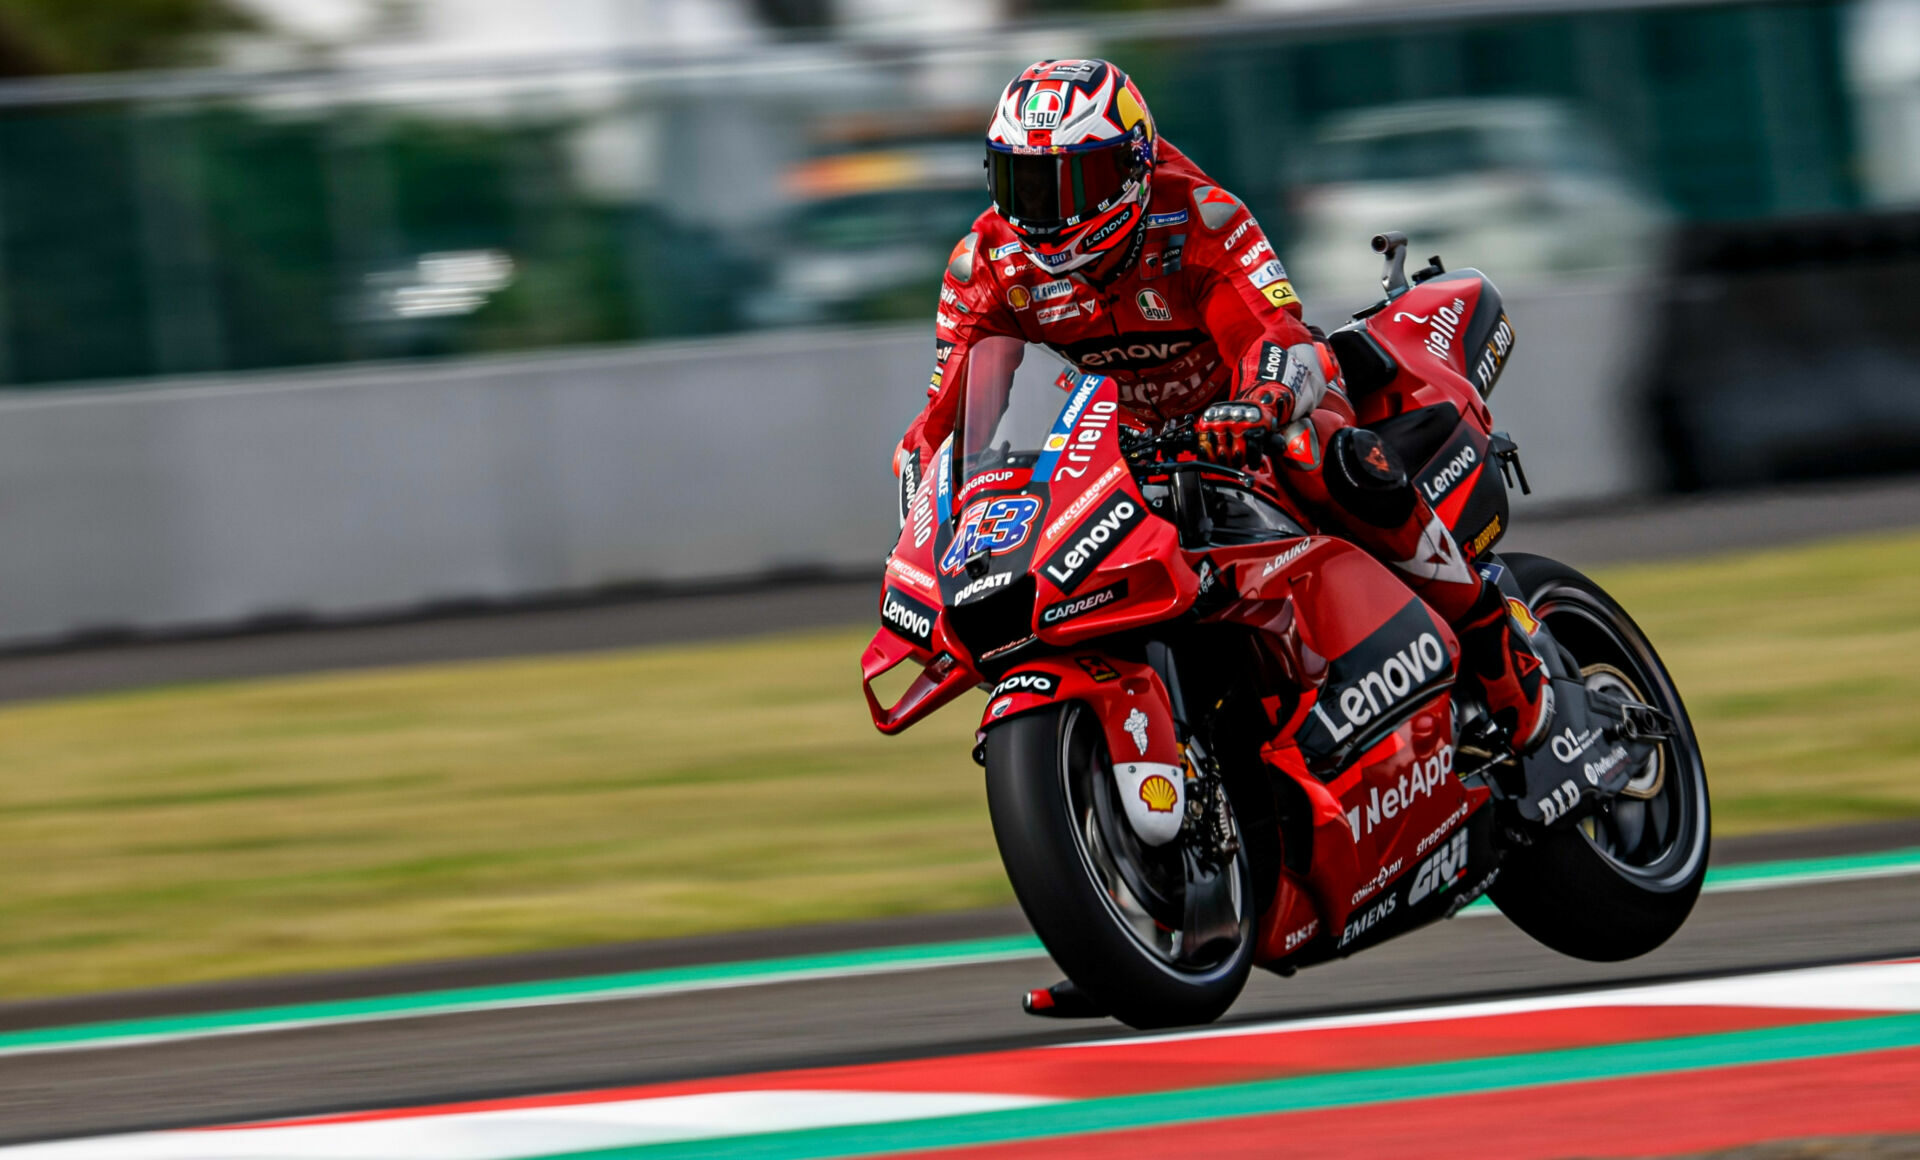 MotoGP: Front Ride Height Devices Outlawed - Roadracing World Magazine |  Motorcycle Riding, Racing & Tech News